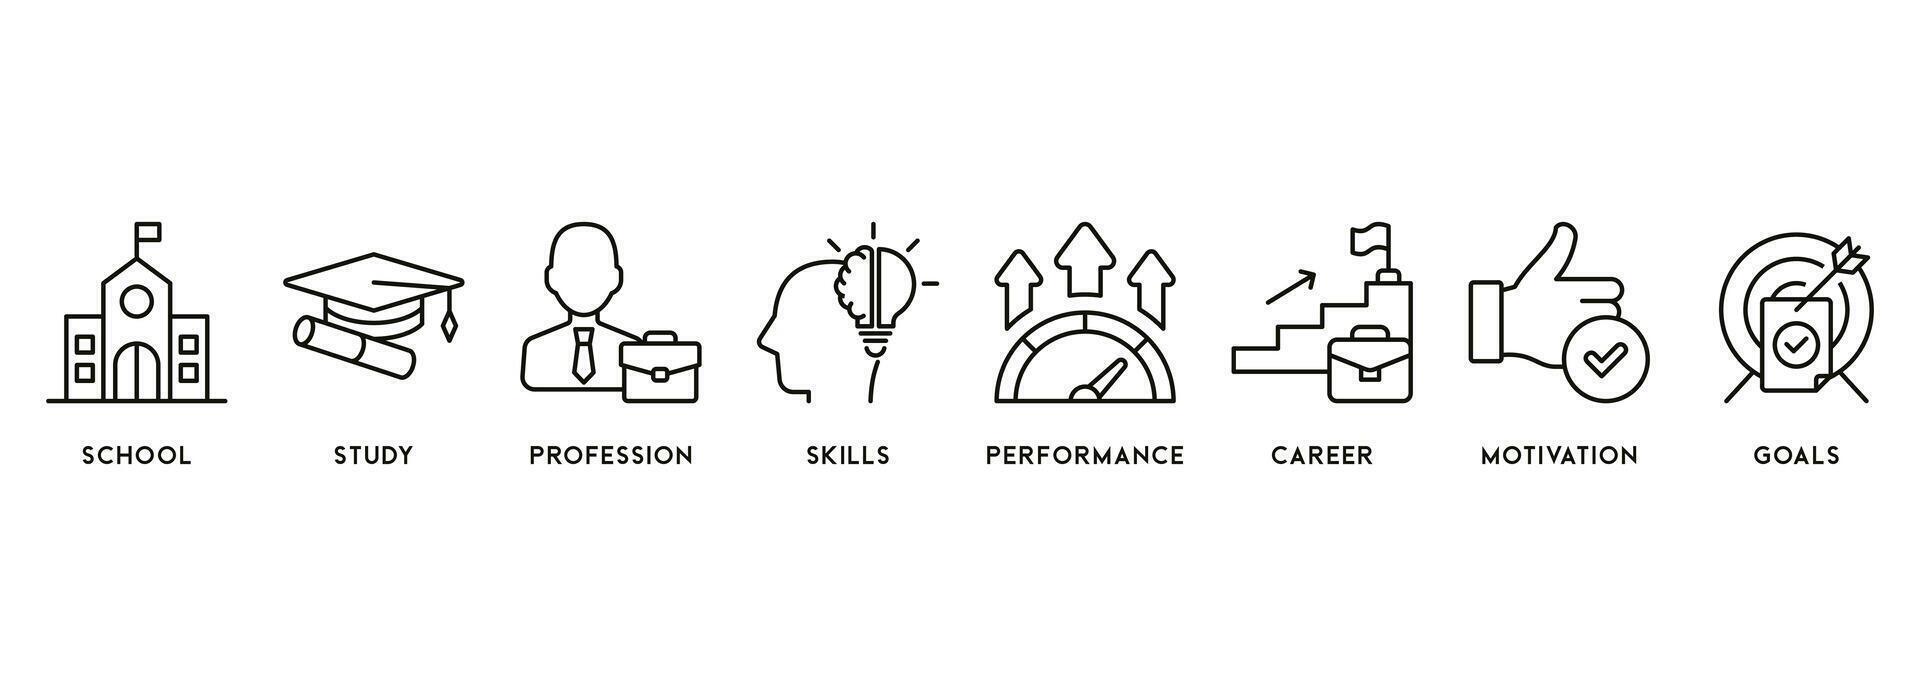 apprenticeship vector illustration concept icons of school, study, profession, skills, performance, career, motivation and goals